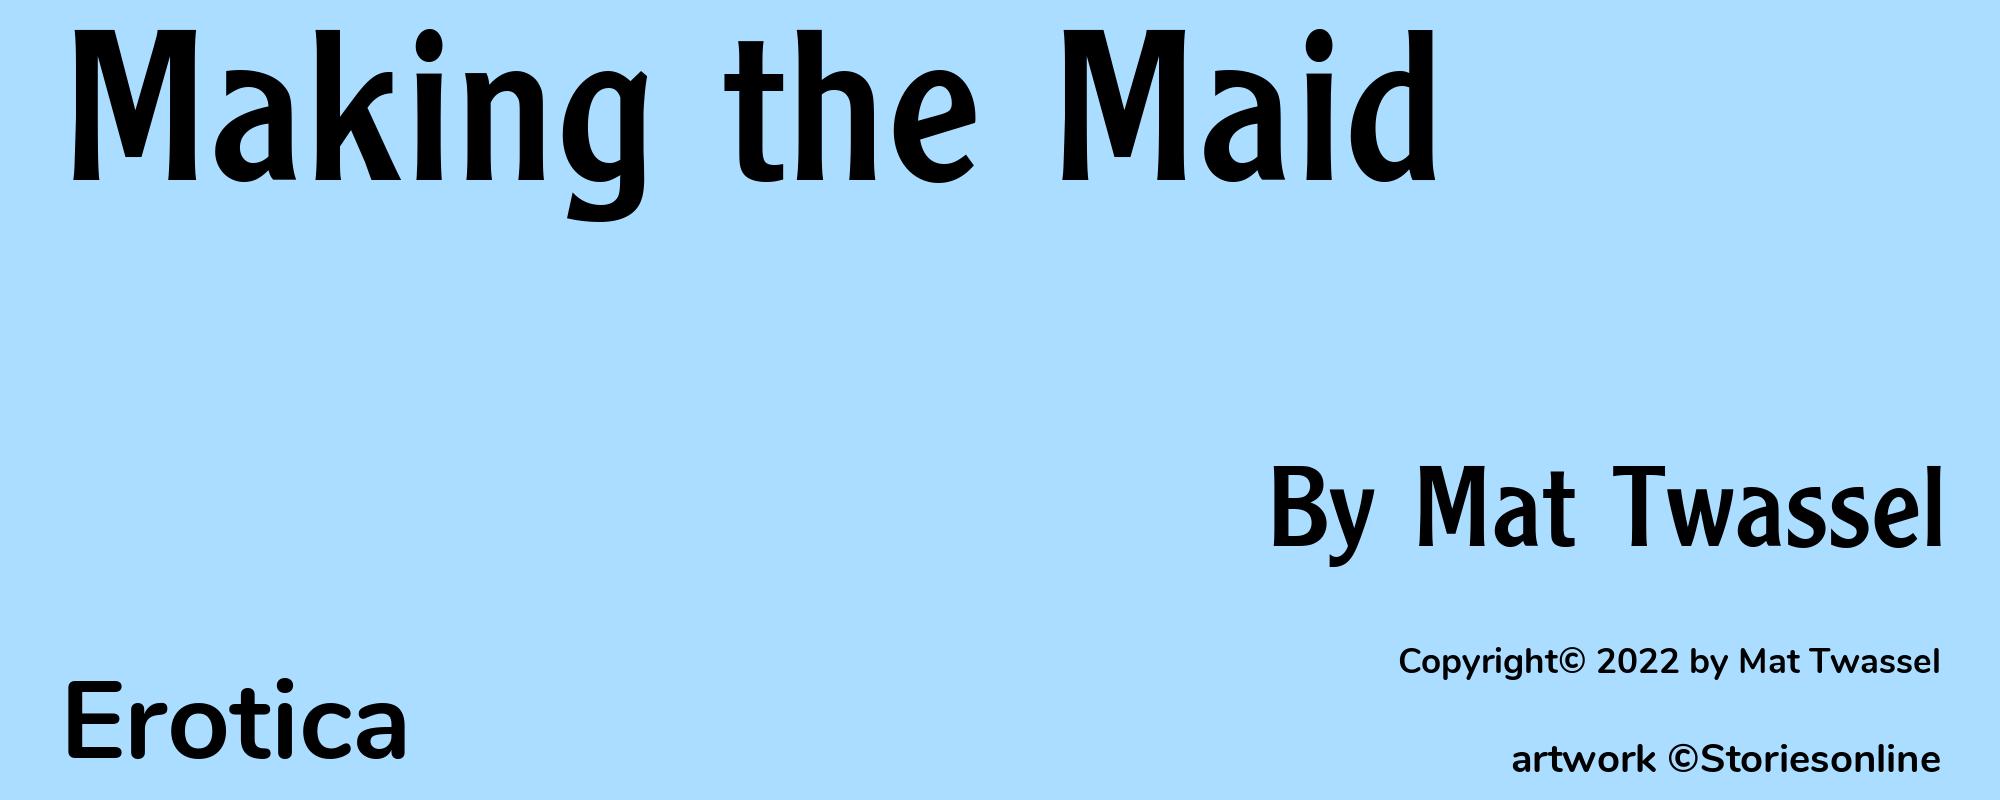 Making the Maid - Cover